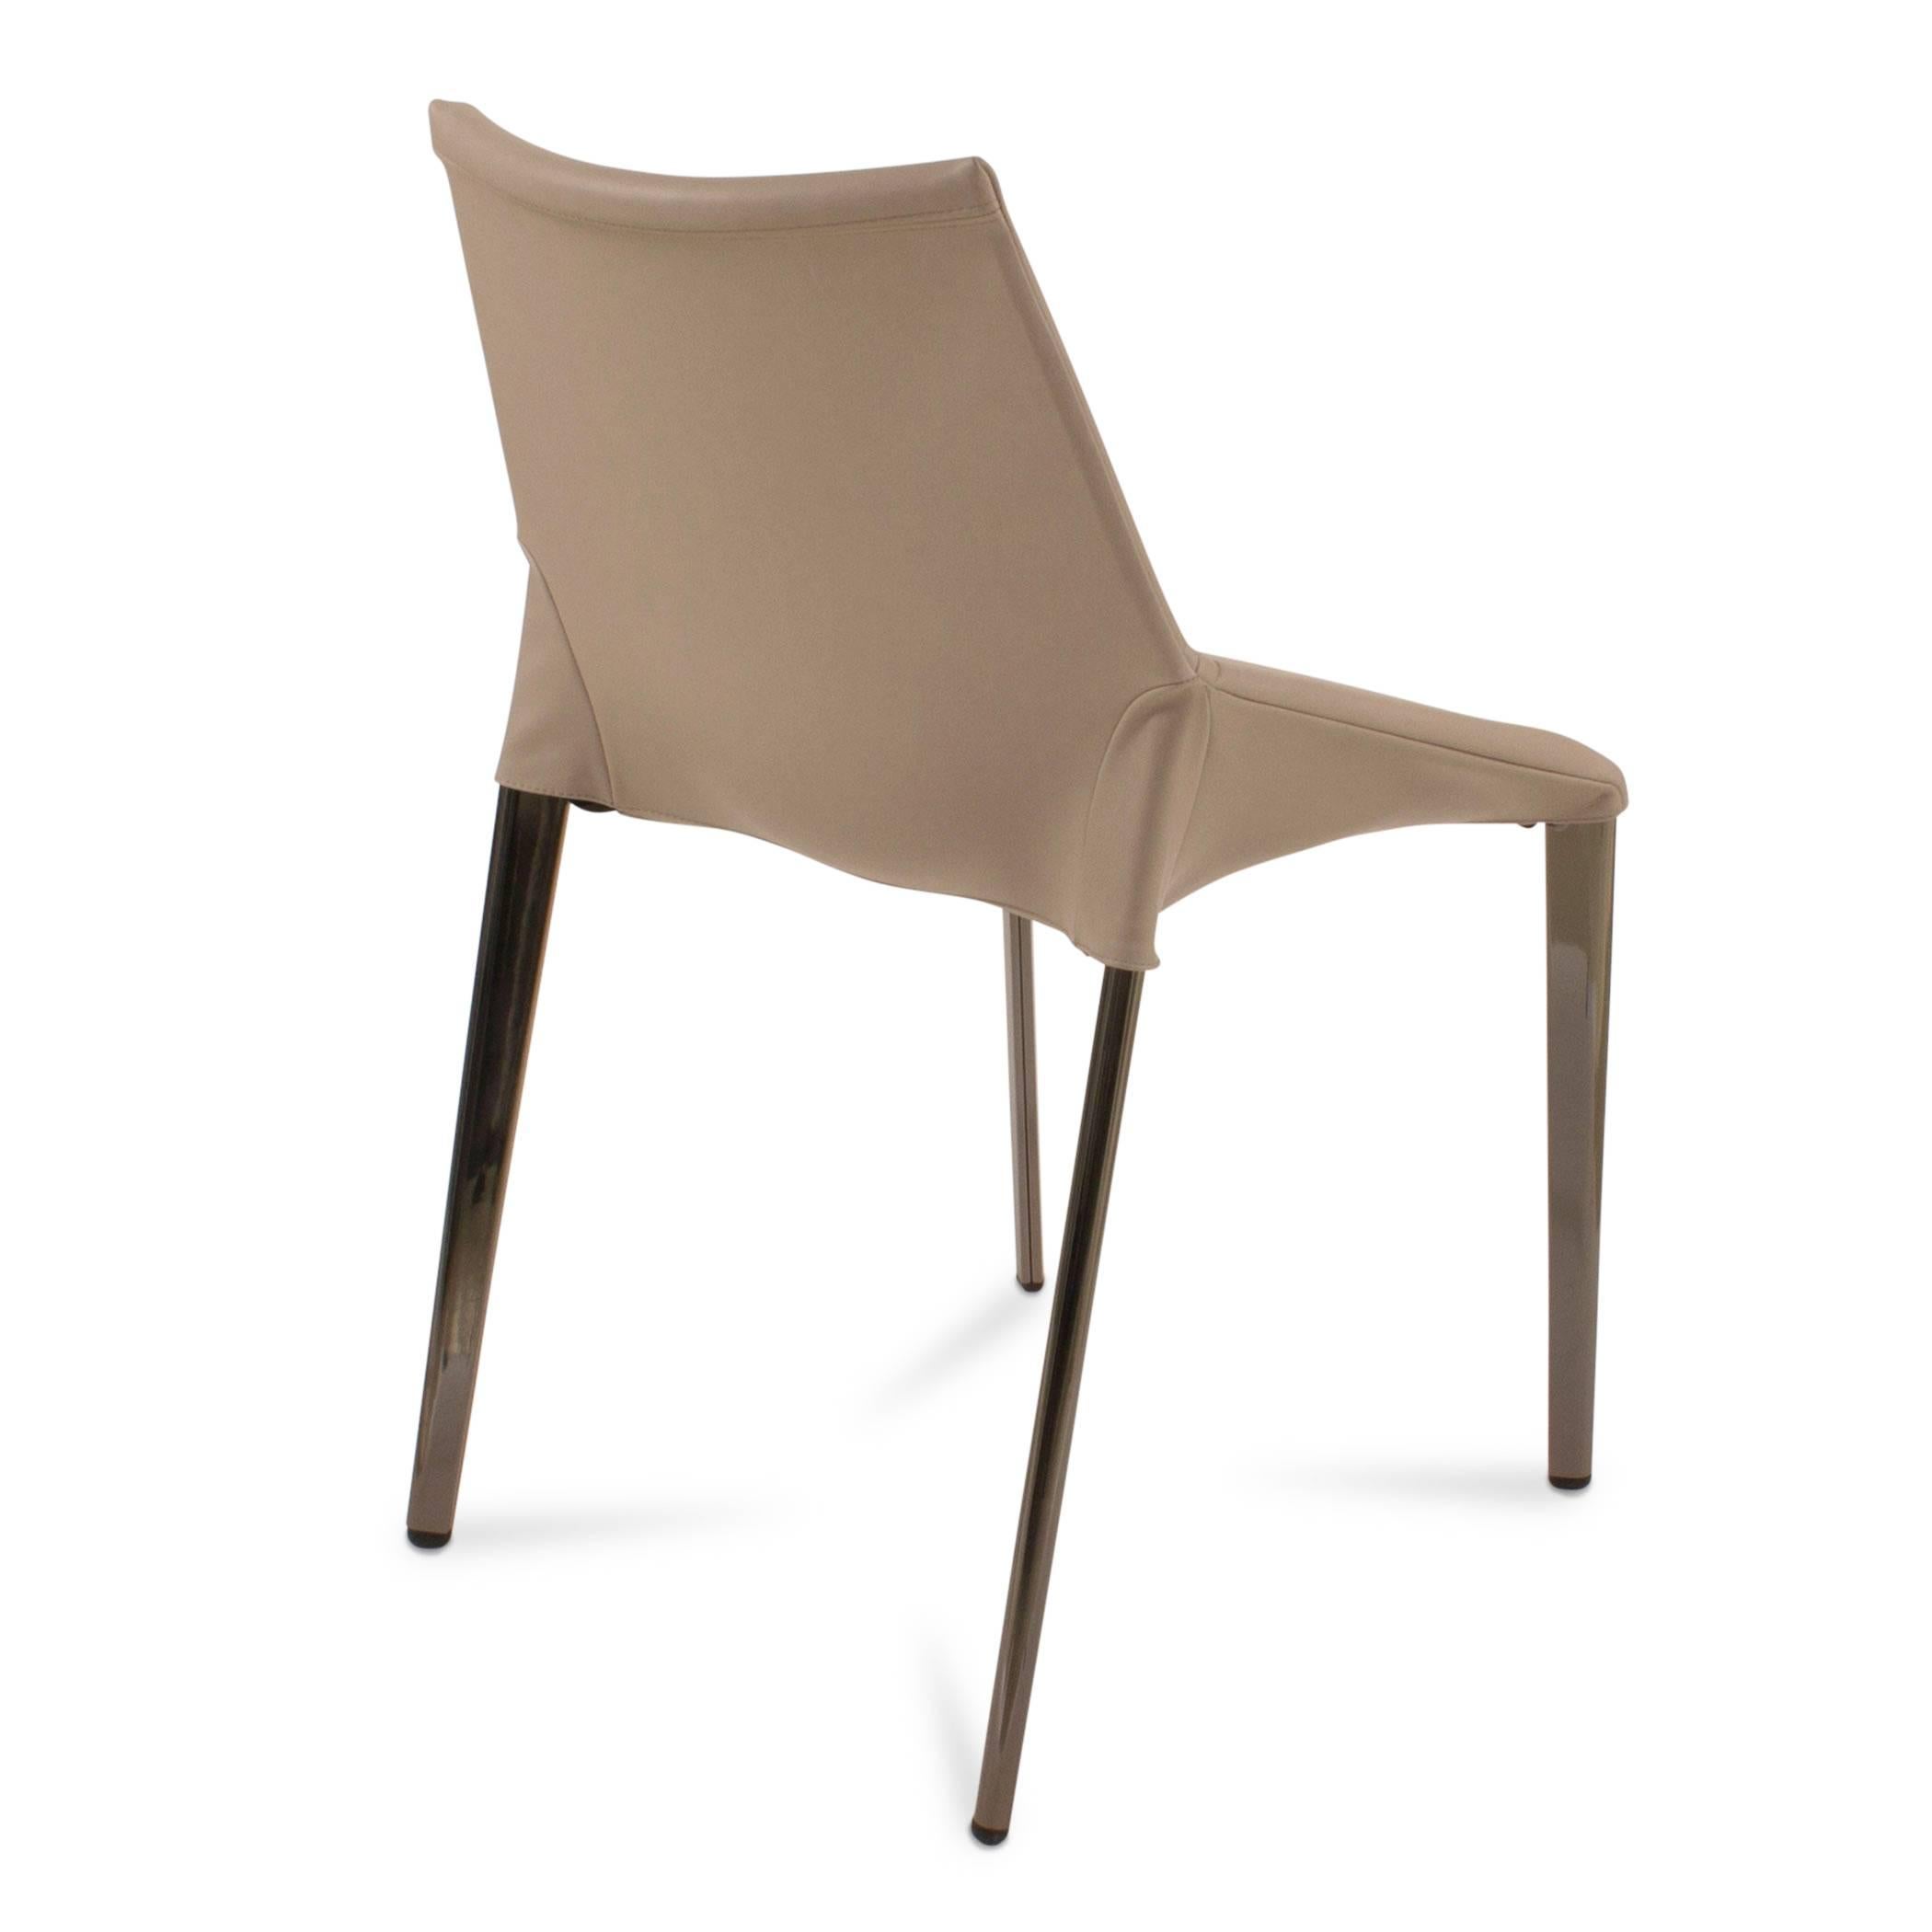 molteni outline chair